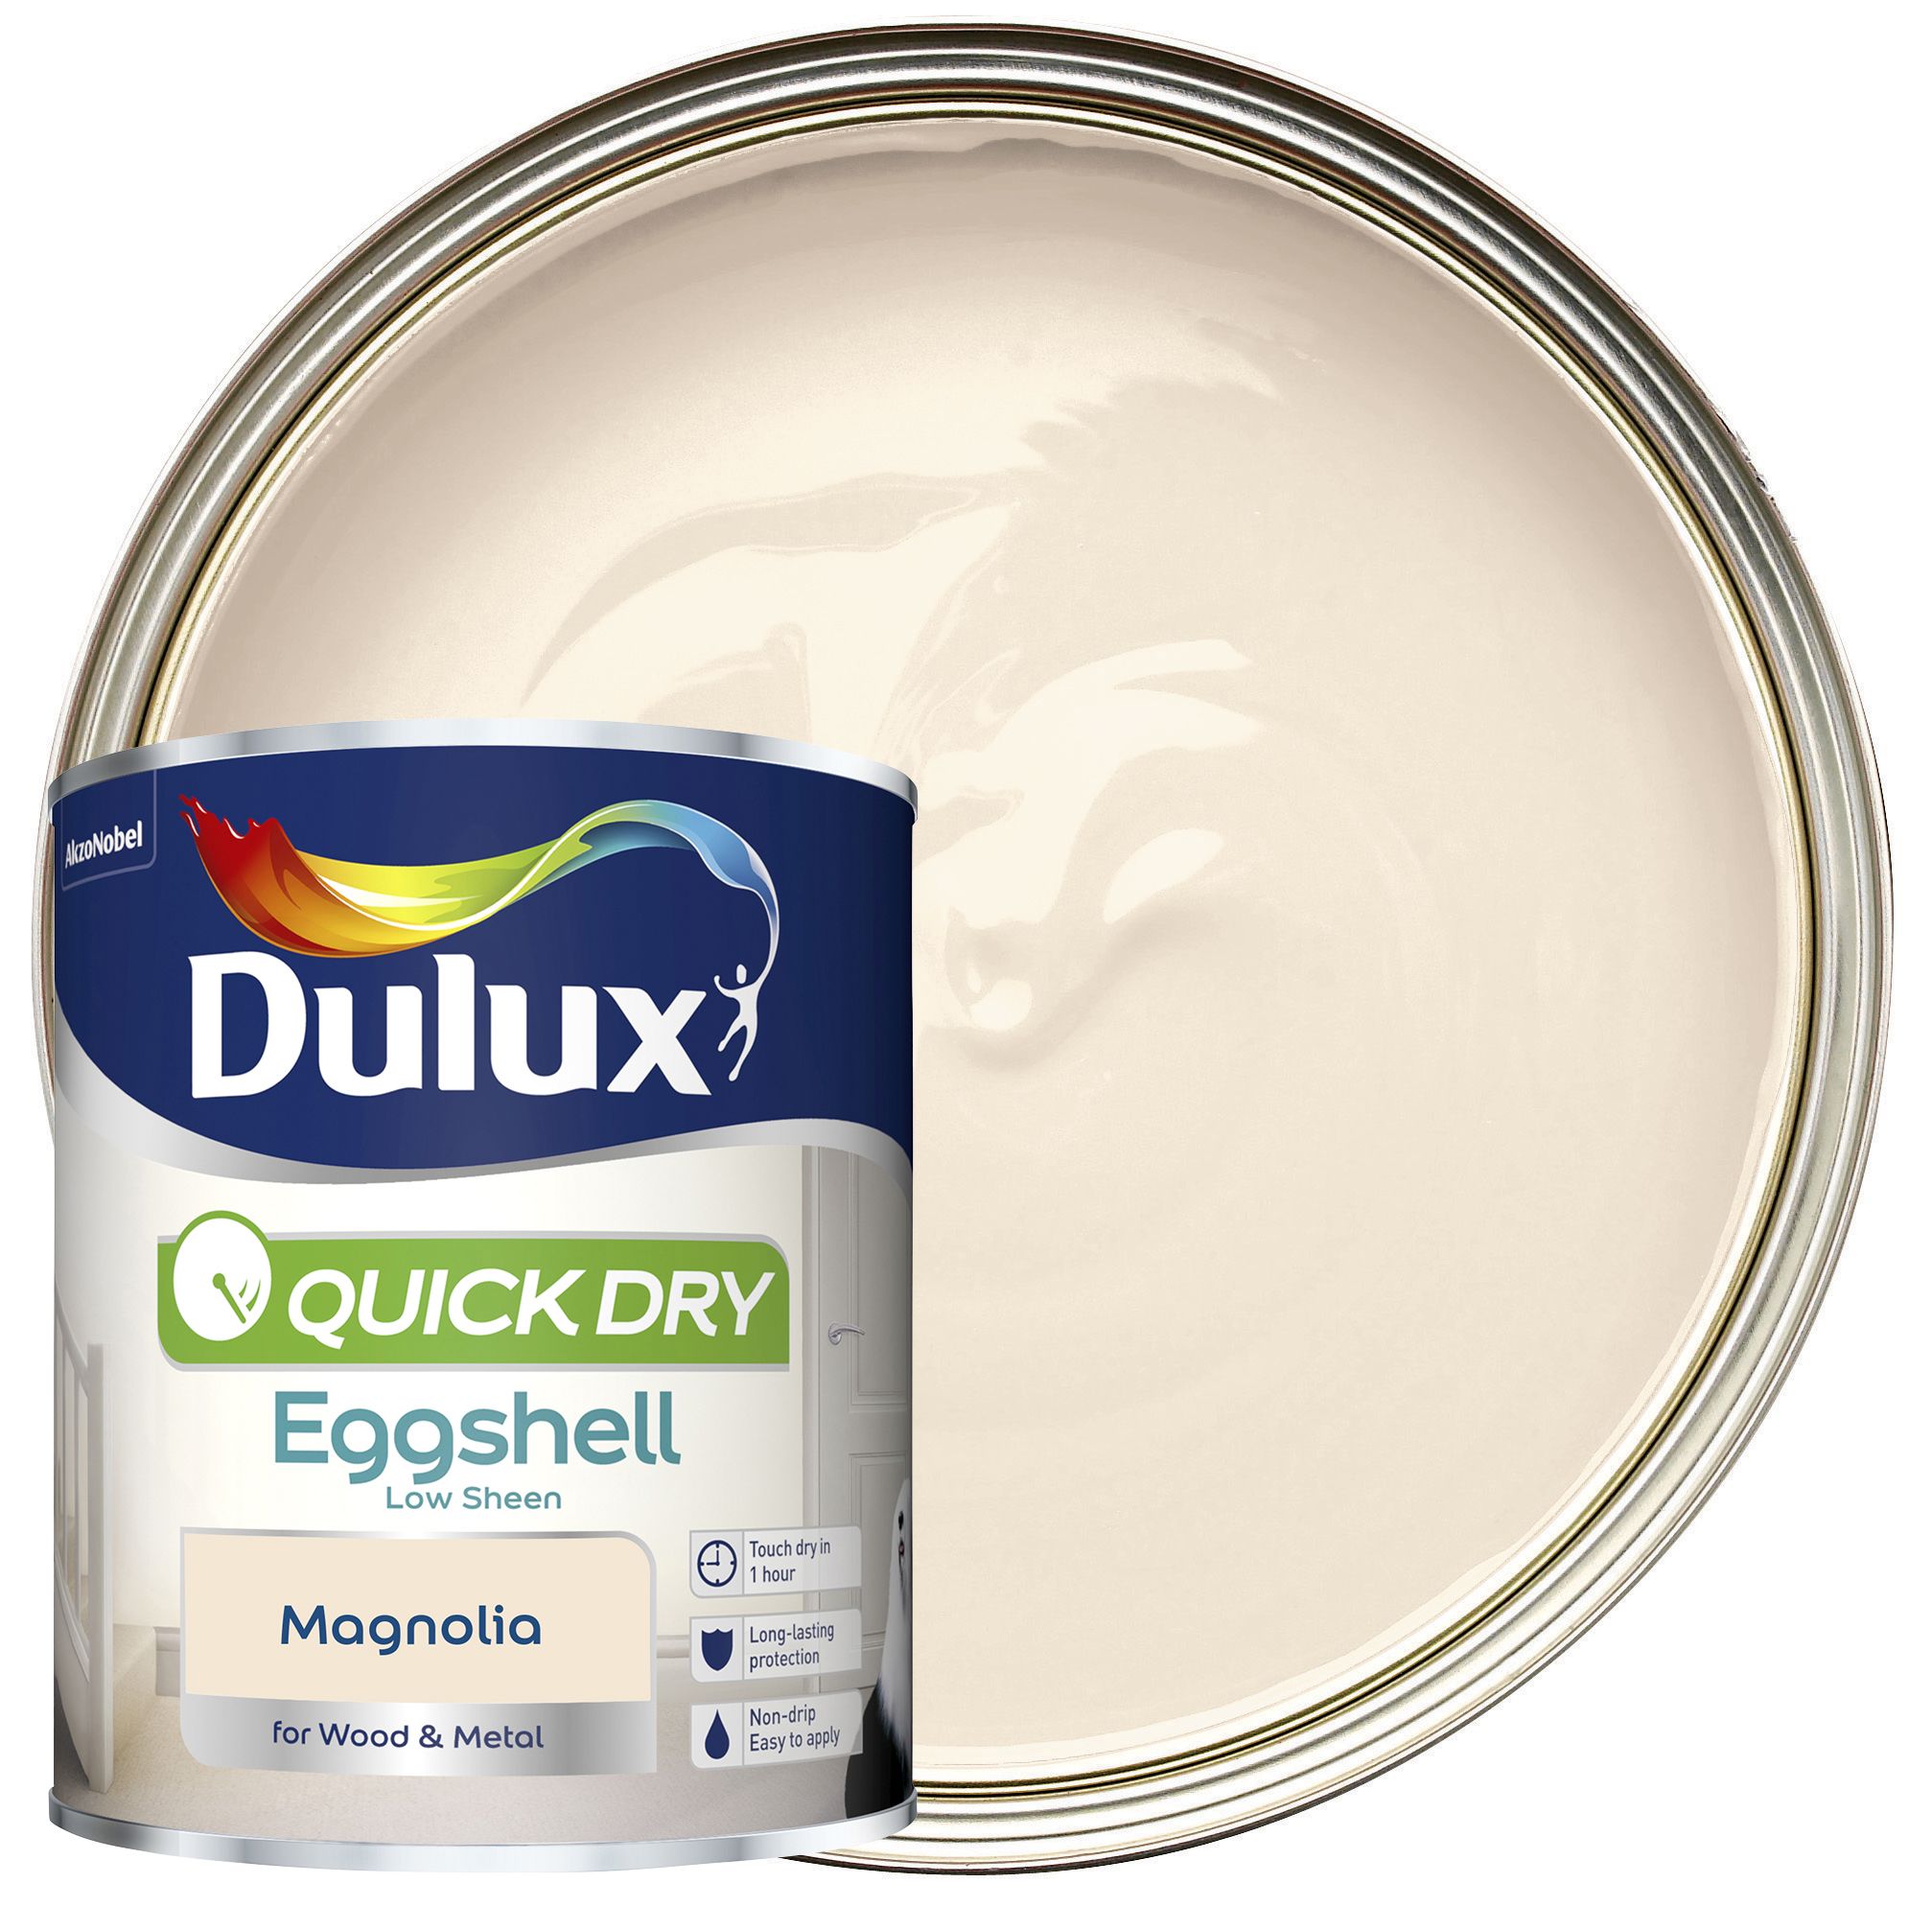 Image of Dulux Quick Drying Eggshell Paint - Magnolia - 750ml